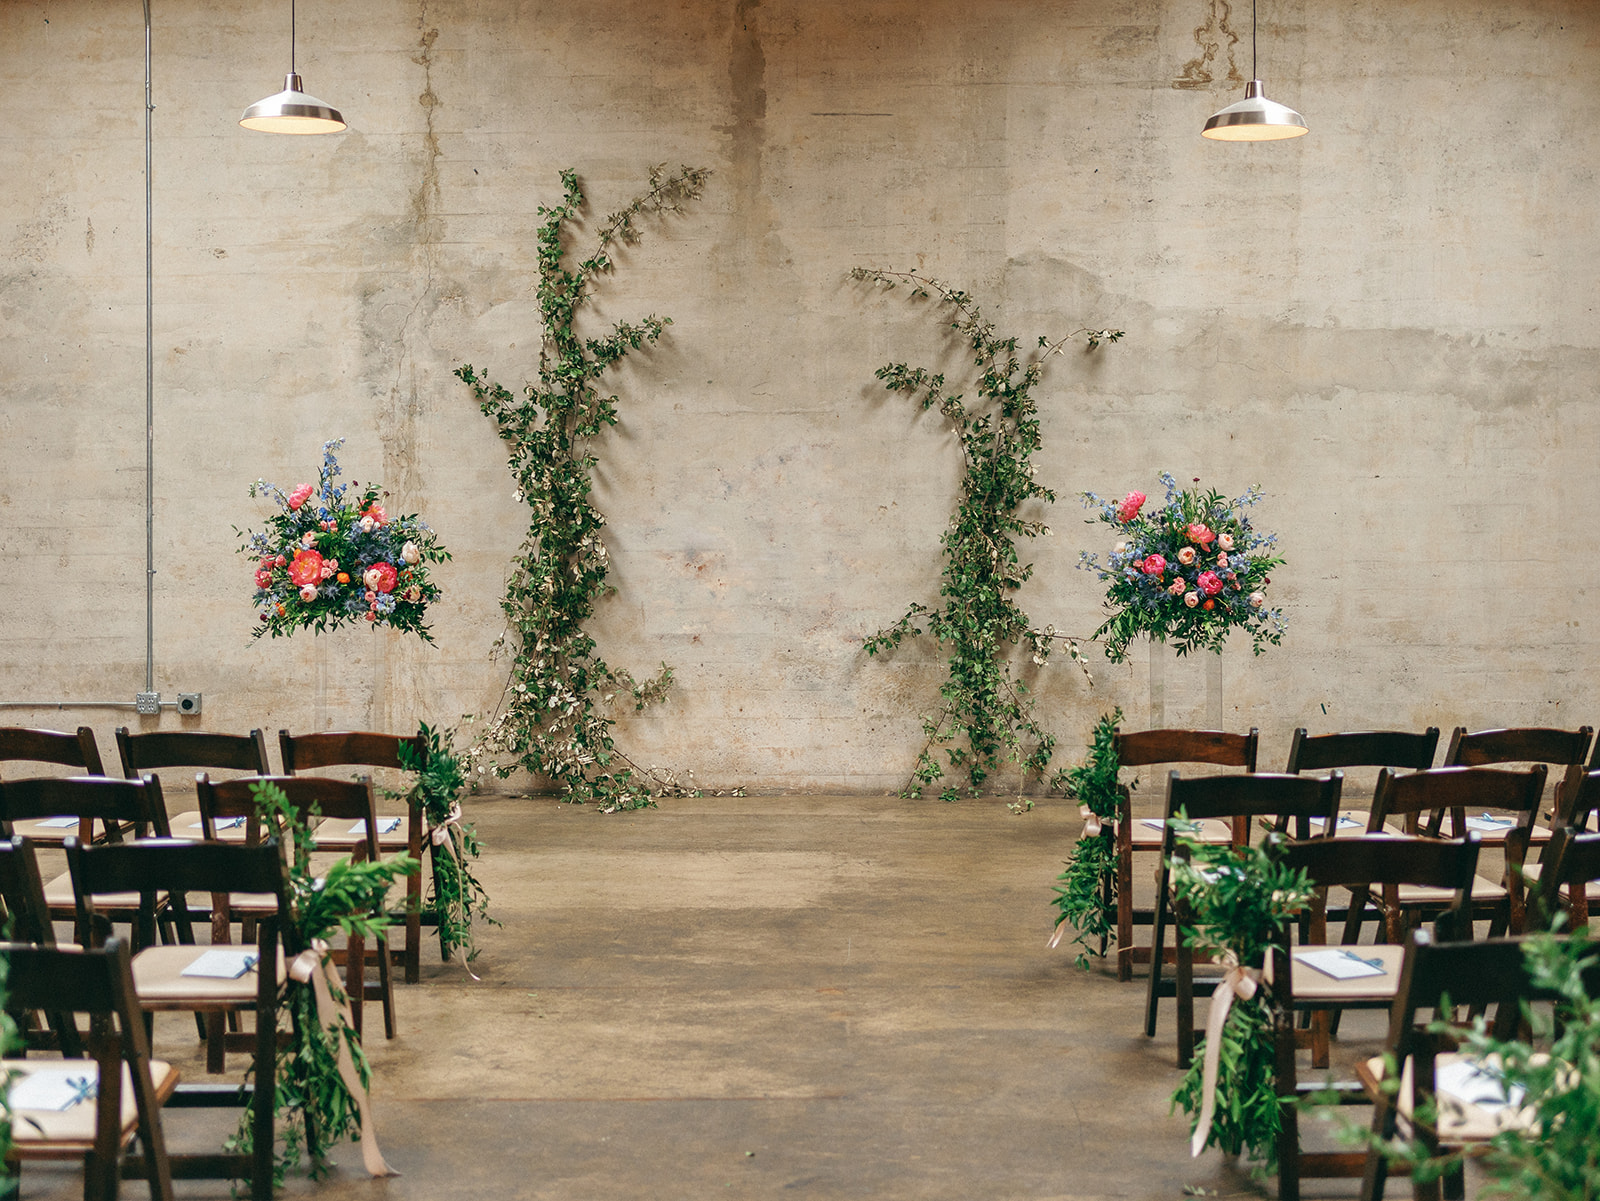 Details of a wedding ceremony set up with wooden chairs and vines on the concrete wall at The Standard Wedding Venue